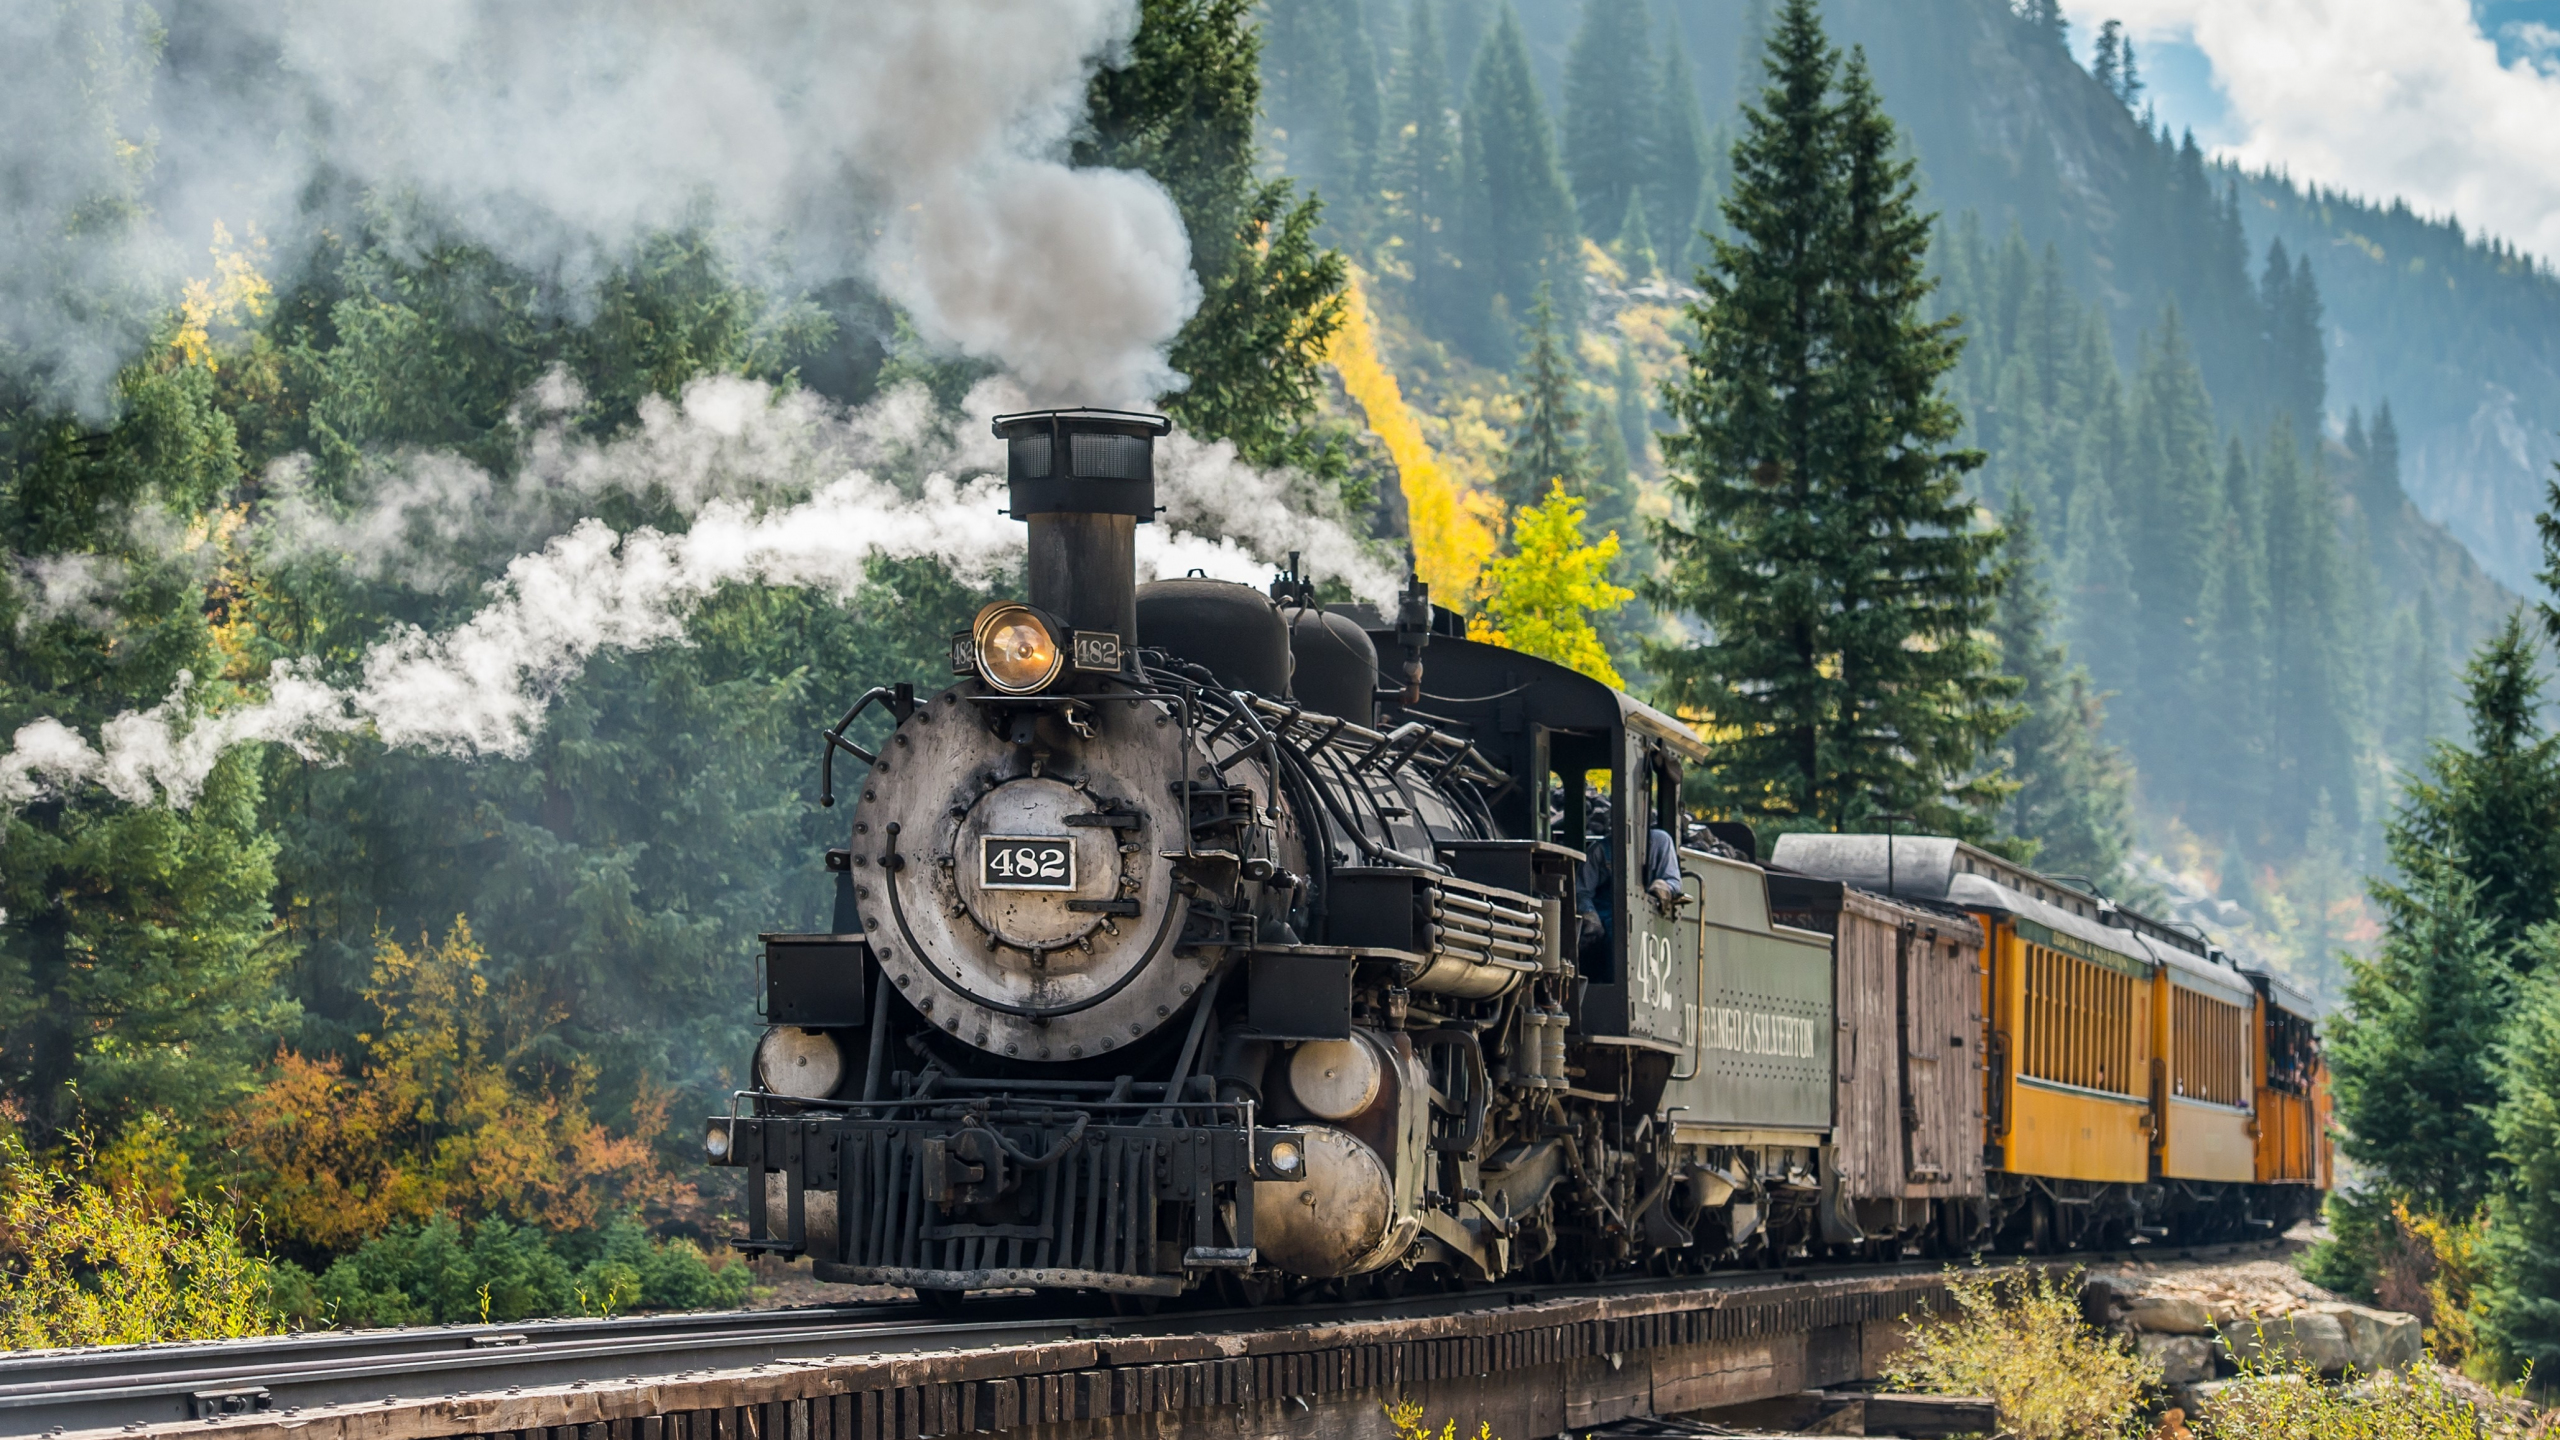 Download wallpaper 2560x1440 steam engine, train, forest, railroad,  vehicle, dual wide 16:9 2560x1440 hd background, 1984